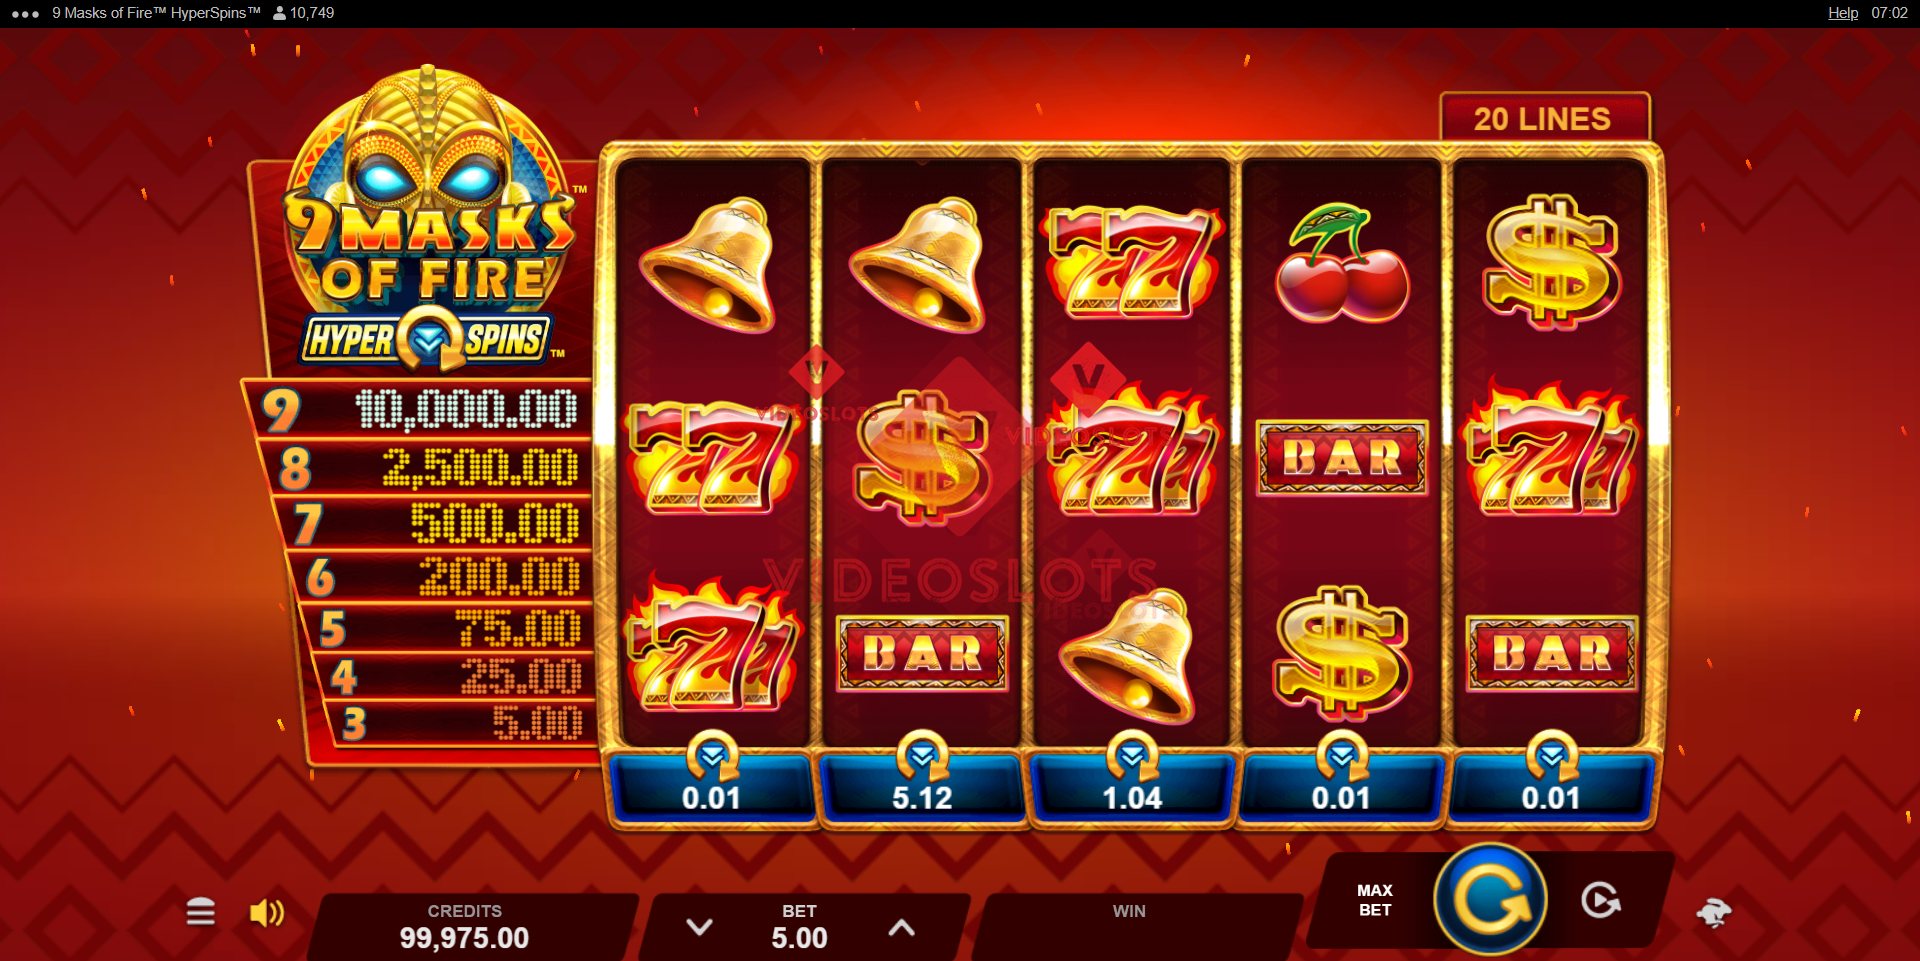 Base Game for 9 Masks of Fire HyperSpins slot for Microgaming